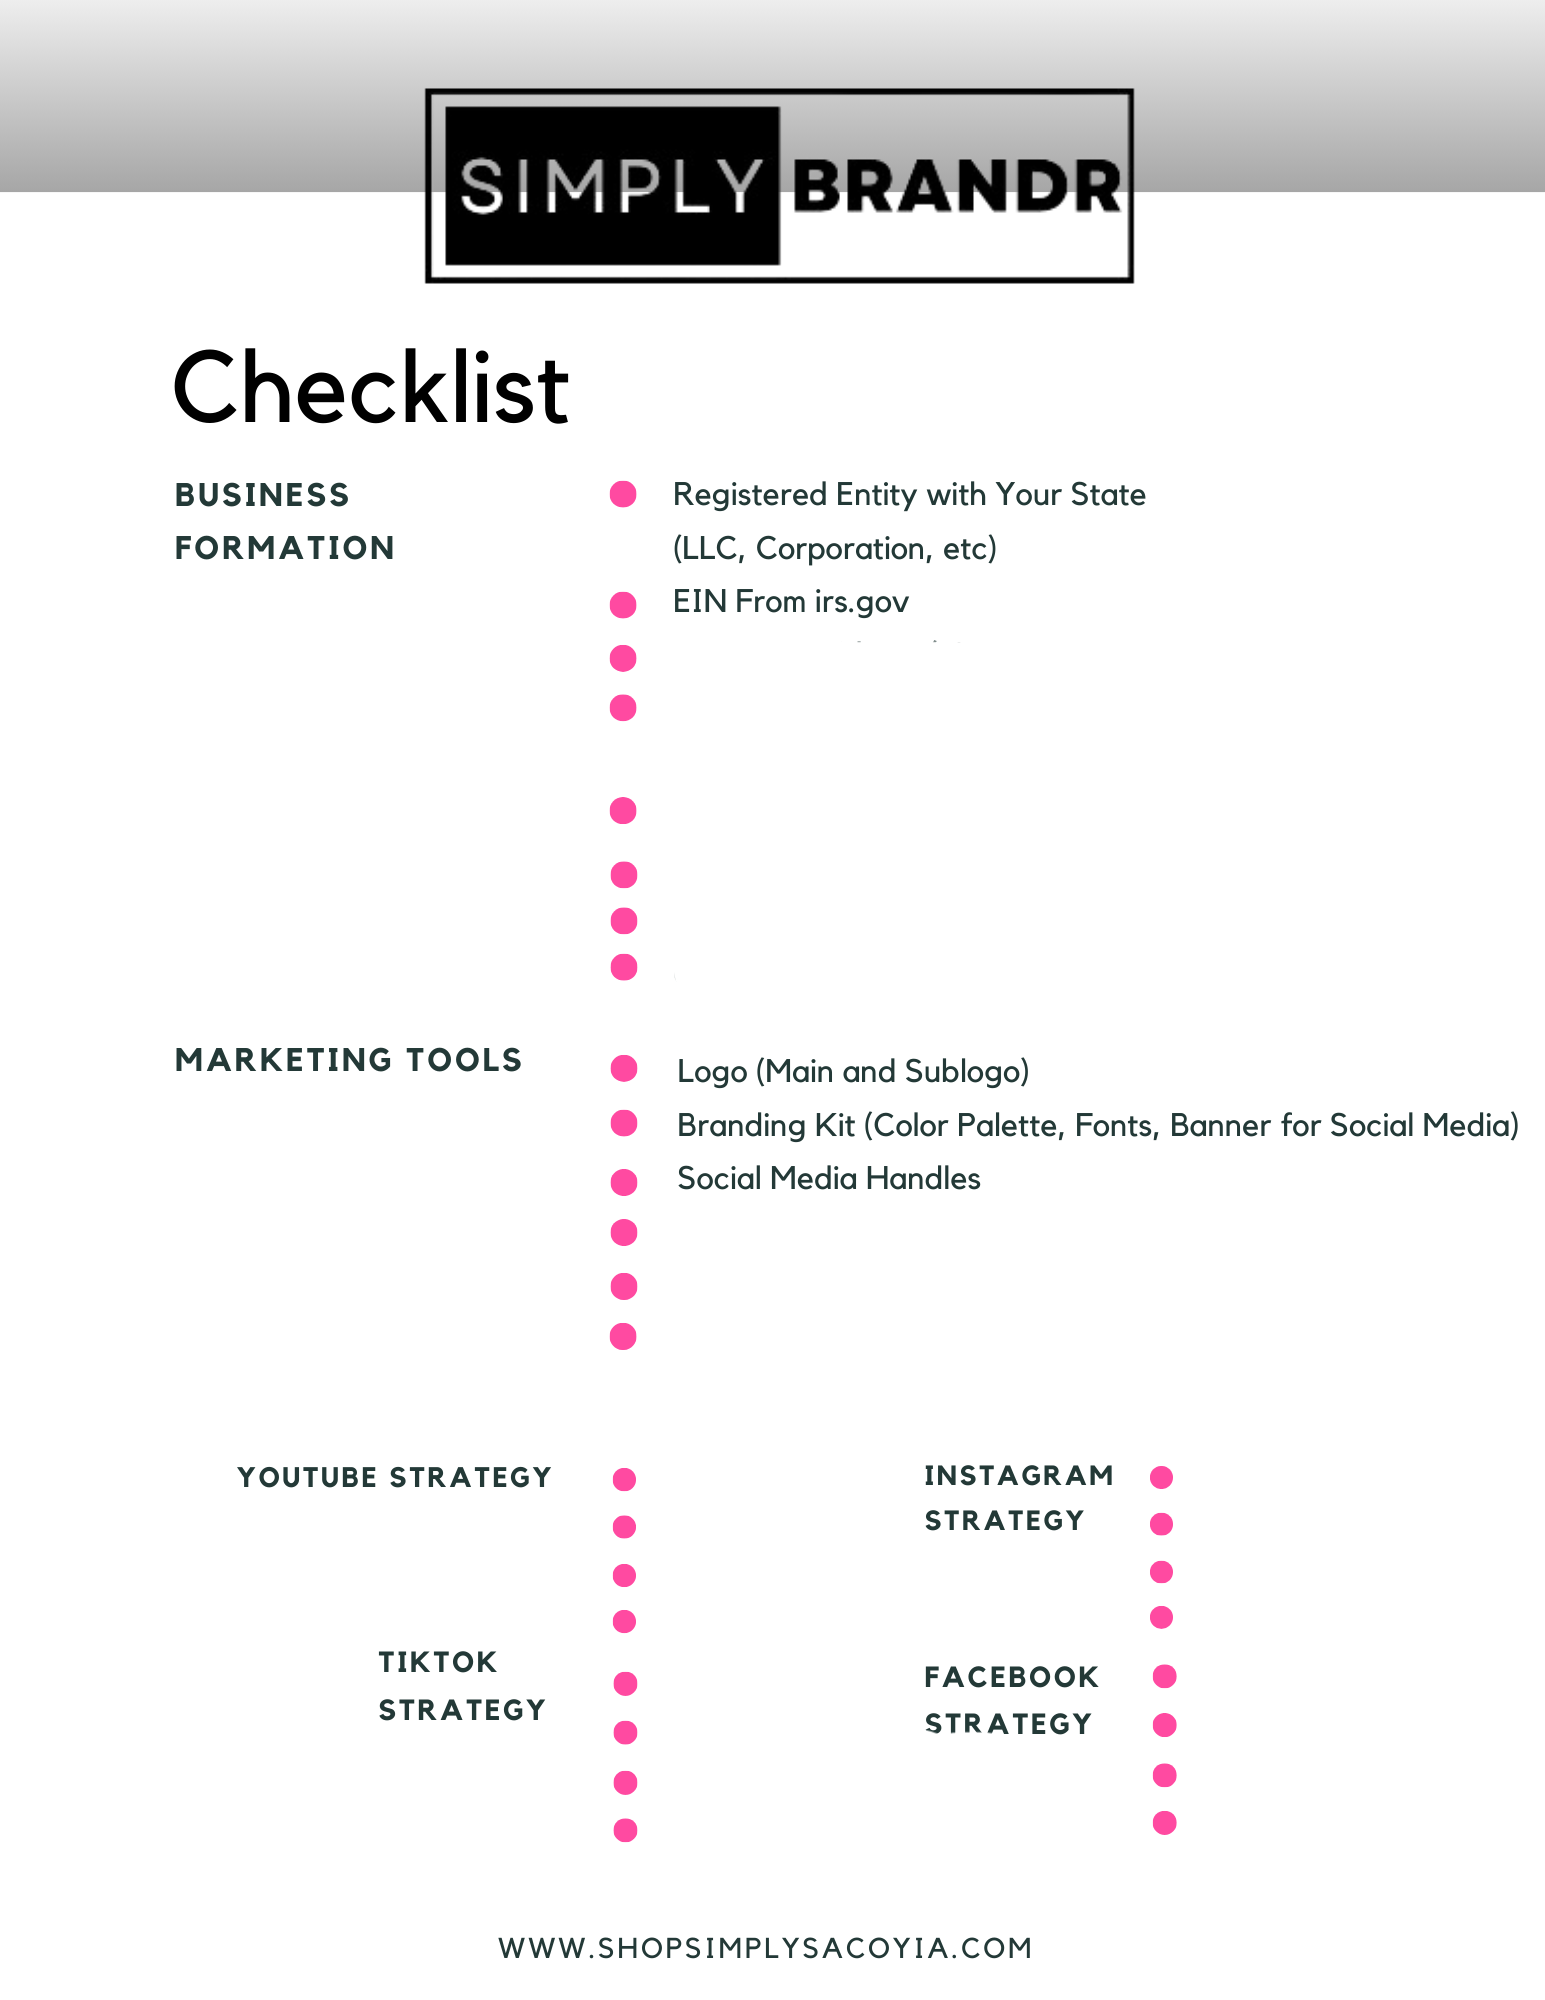 Business starter checklist, business formation, marketing tools, branding tools, marketing strategy